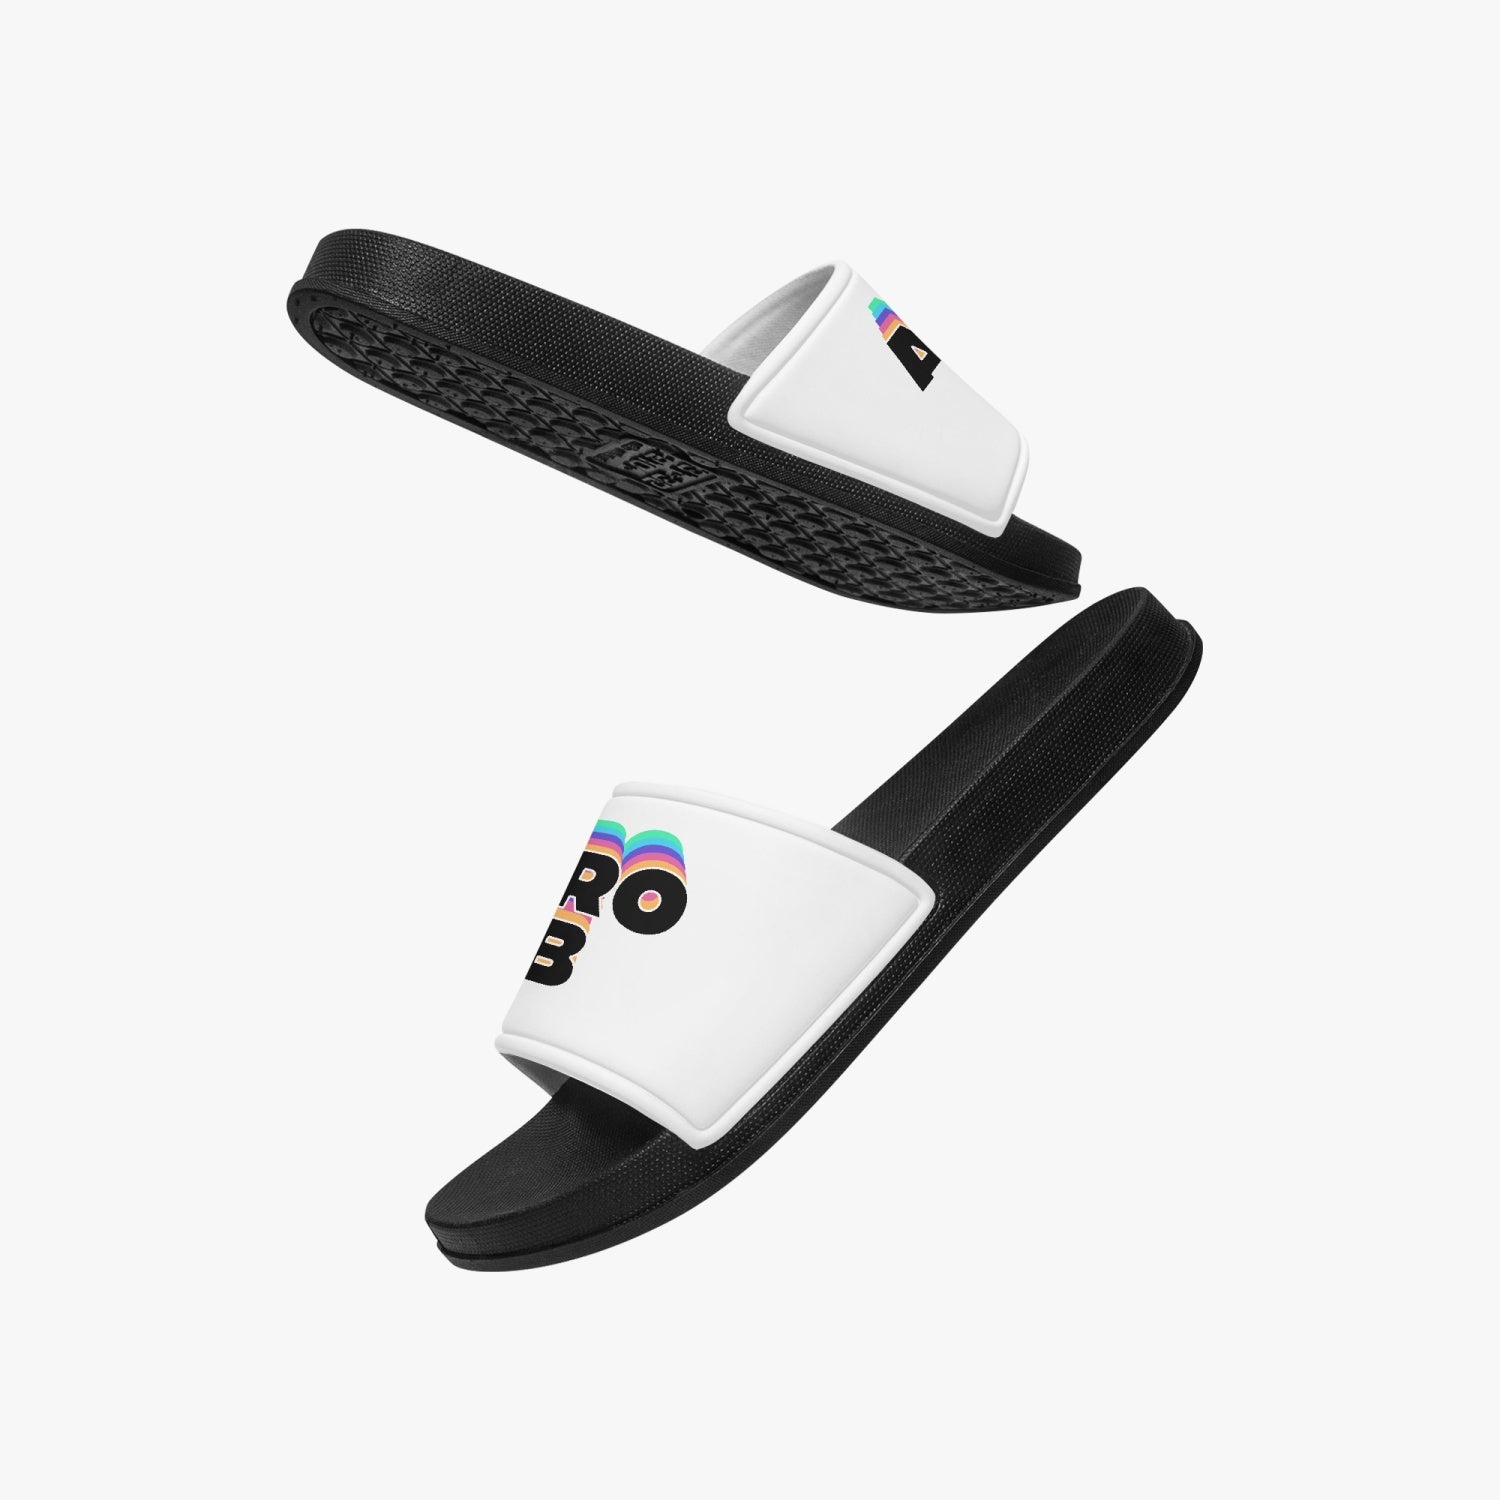 651. Astro-Lab-Home Slippers - Black